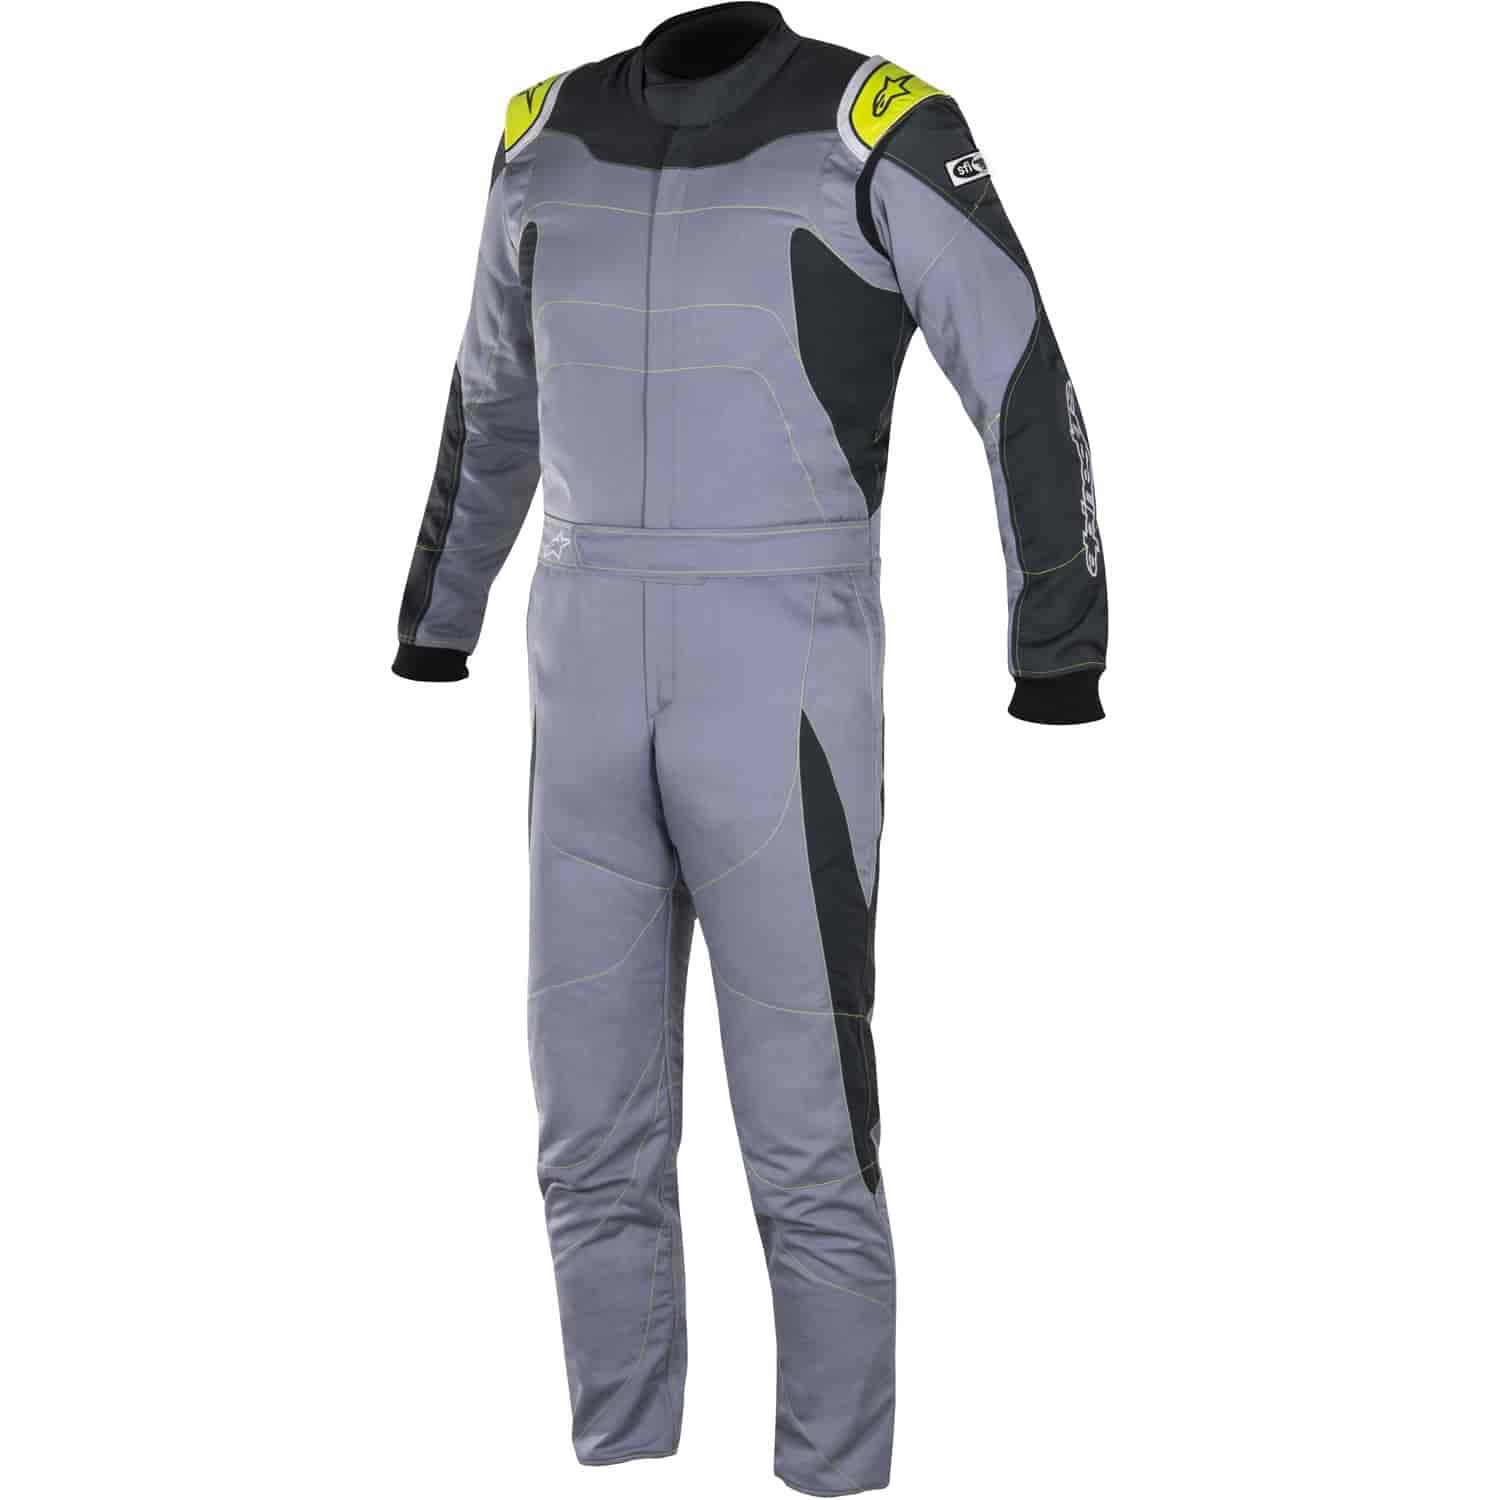 GP Race Suit Gray/Anthracite/Yellow Fluorescent SFI 3.2A/5